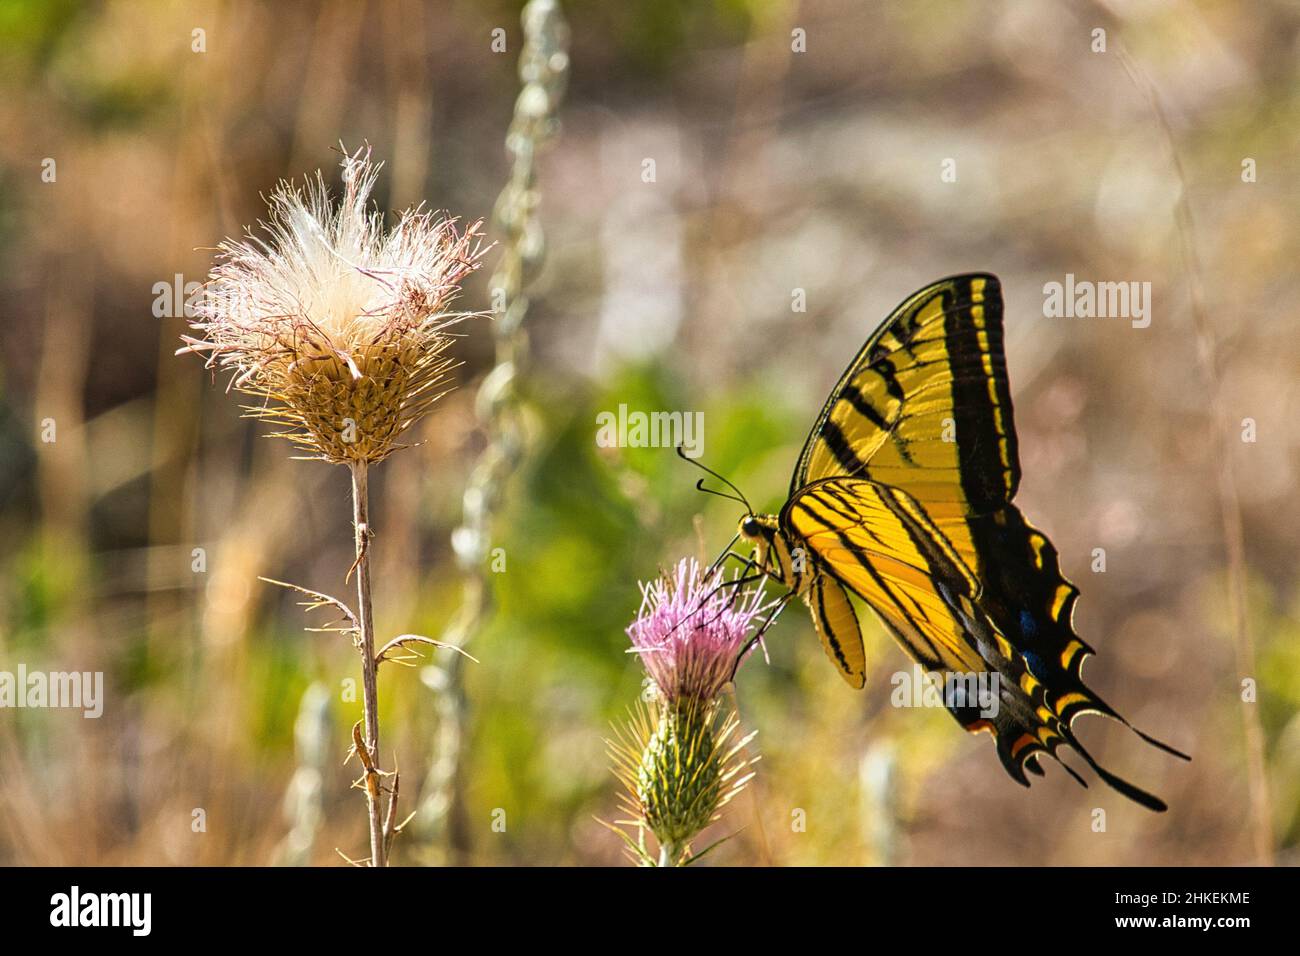 Closeup shot of a yellow butterfly sitting on a Cirsium vulgare flower Stock Photo